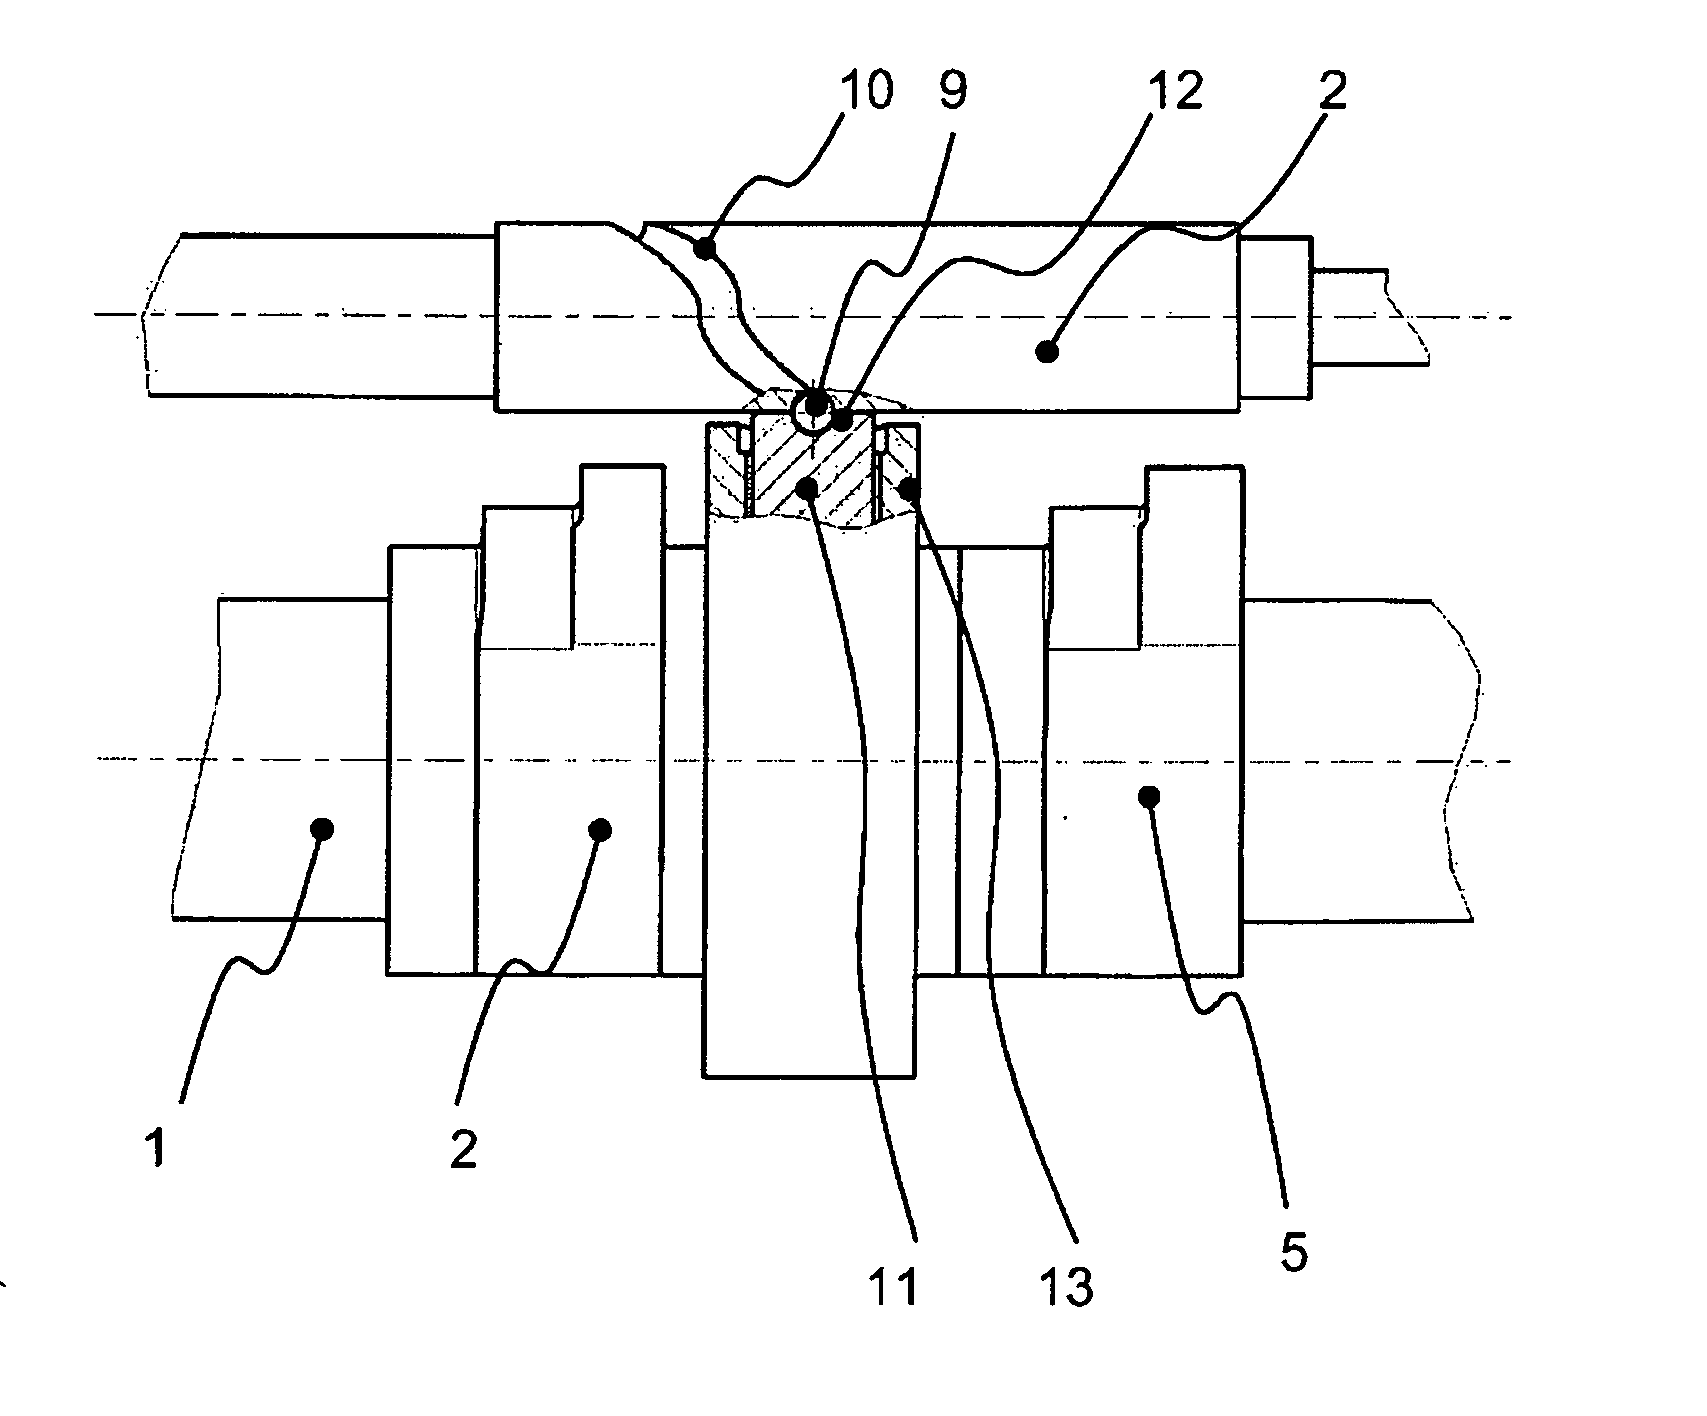 Valve drive for activation of gas exchange valves of internal combustion engines